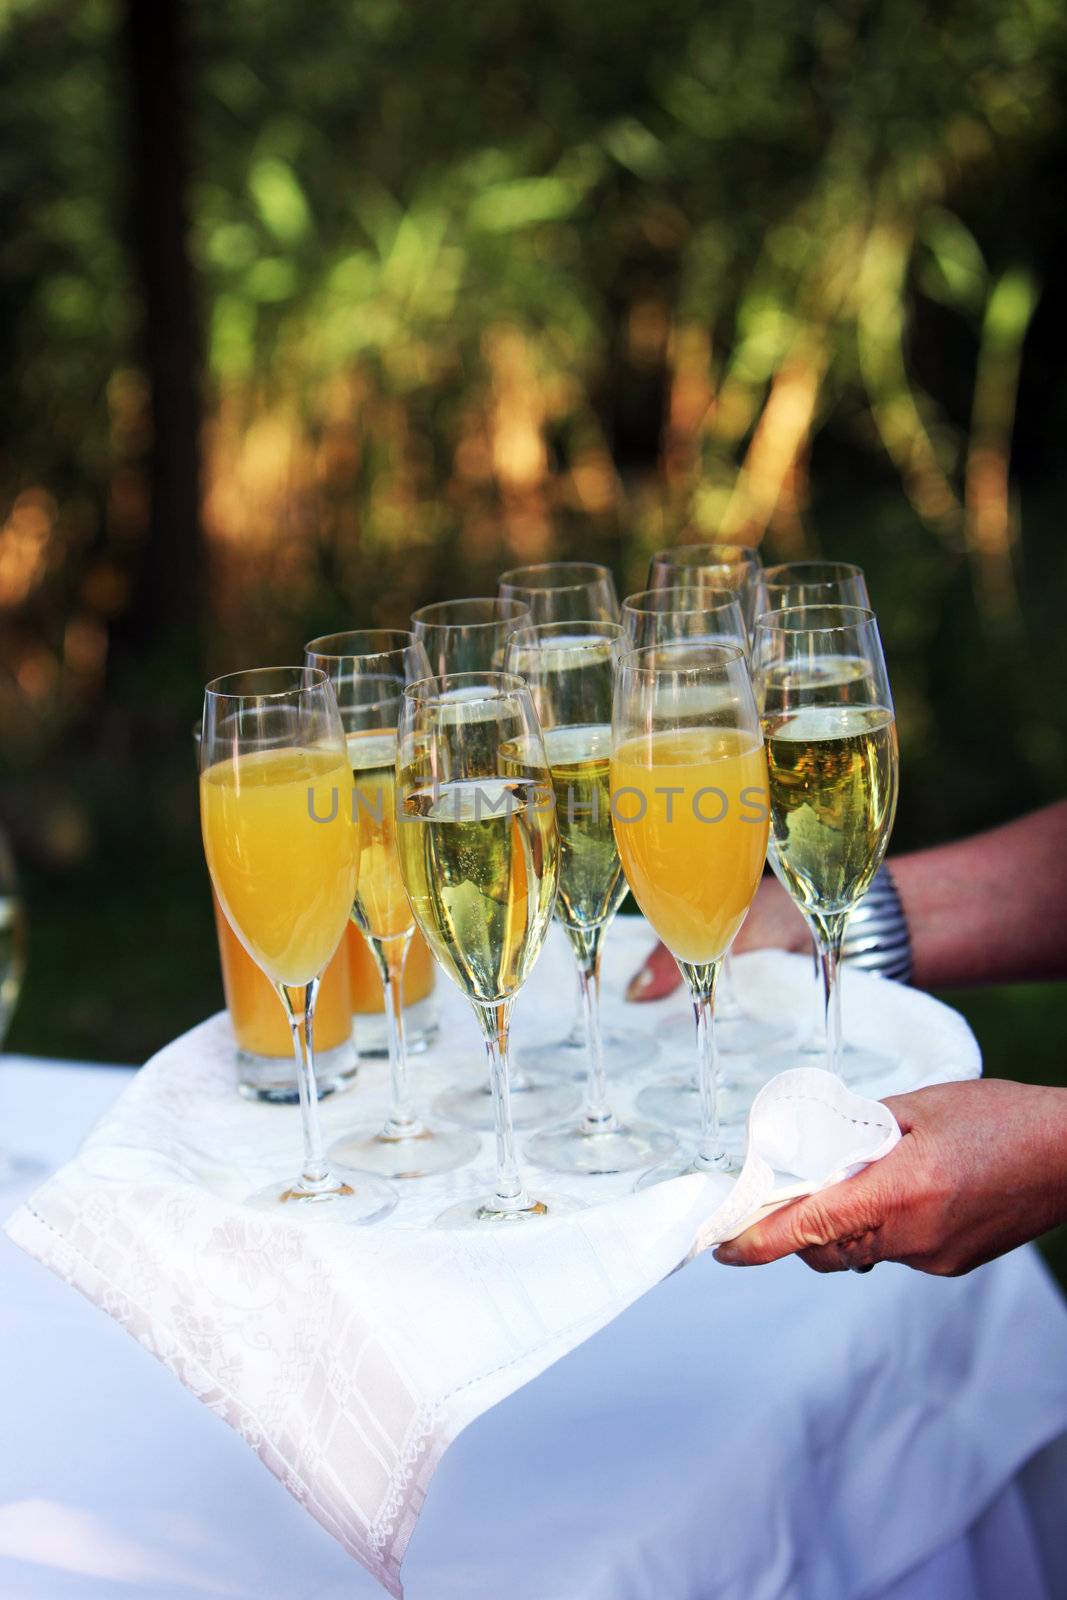 Waiter carrying a tray of champagne flutes anf orange juice for toasting at a formal function or wedding 